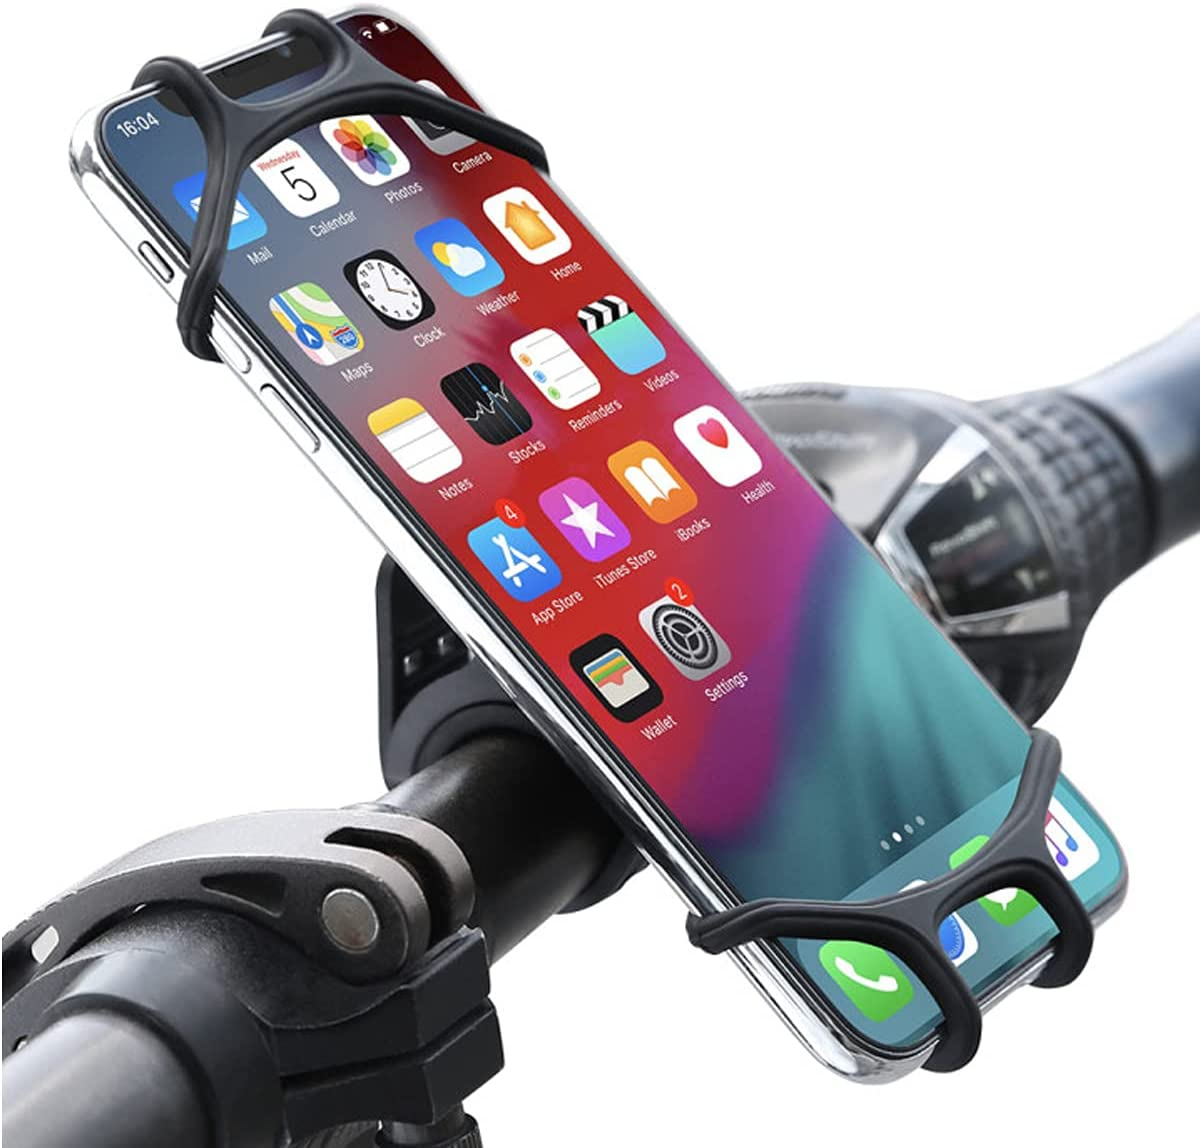 Bike Phone Mount Compatible with Most Phones 360 Rotation Silicone Bicycle Phone Holder, Universal Motorcycle Handlebar Mount Compatible with Iphone and Samsung 4.0”- 6.5” in Phones, Black